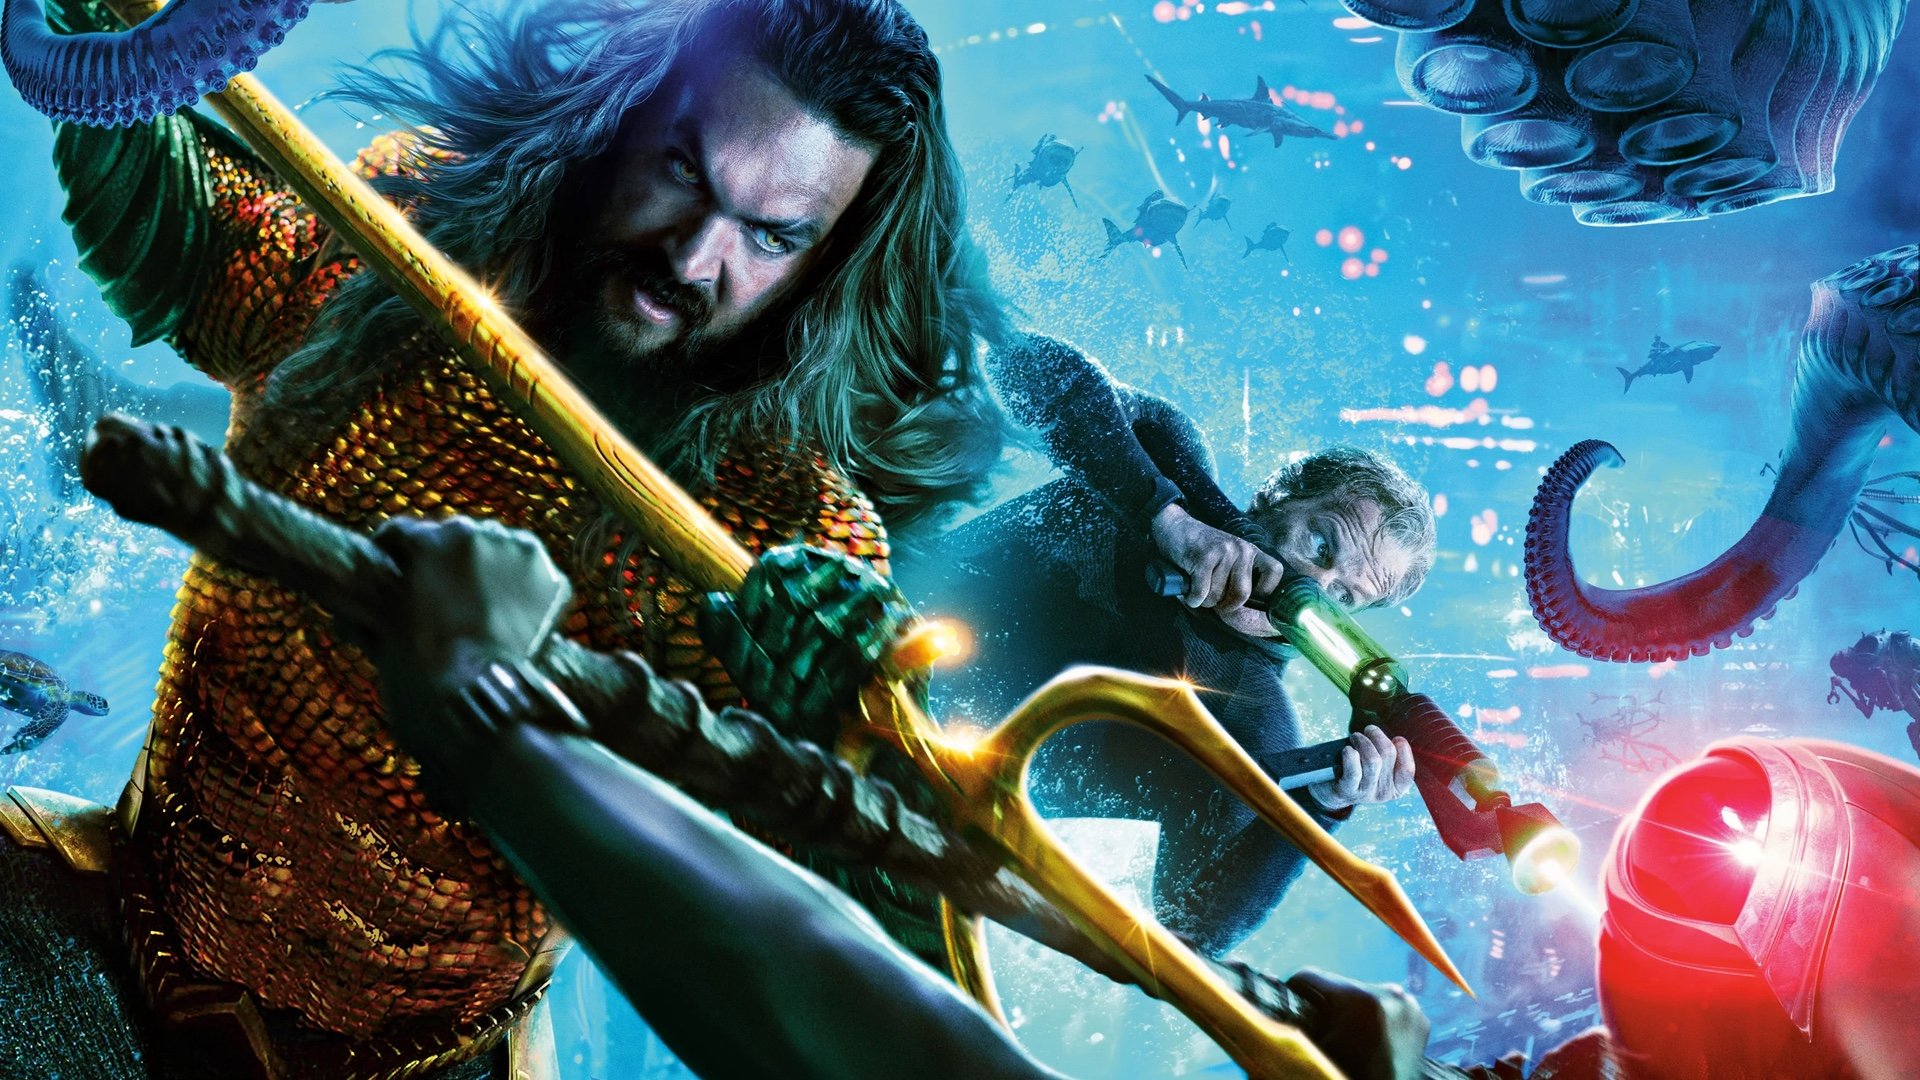 Final for AQUAMAN AND THE LOST KINGDOM